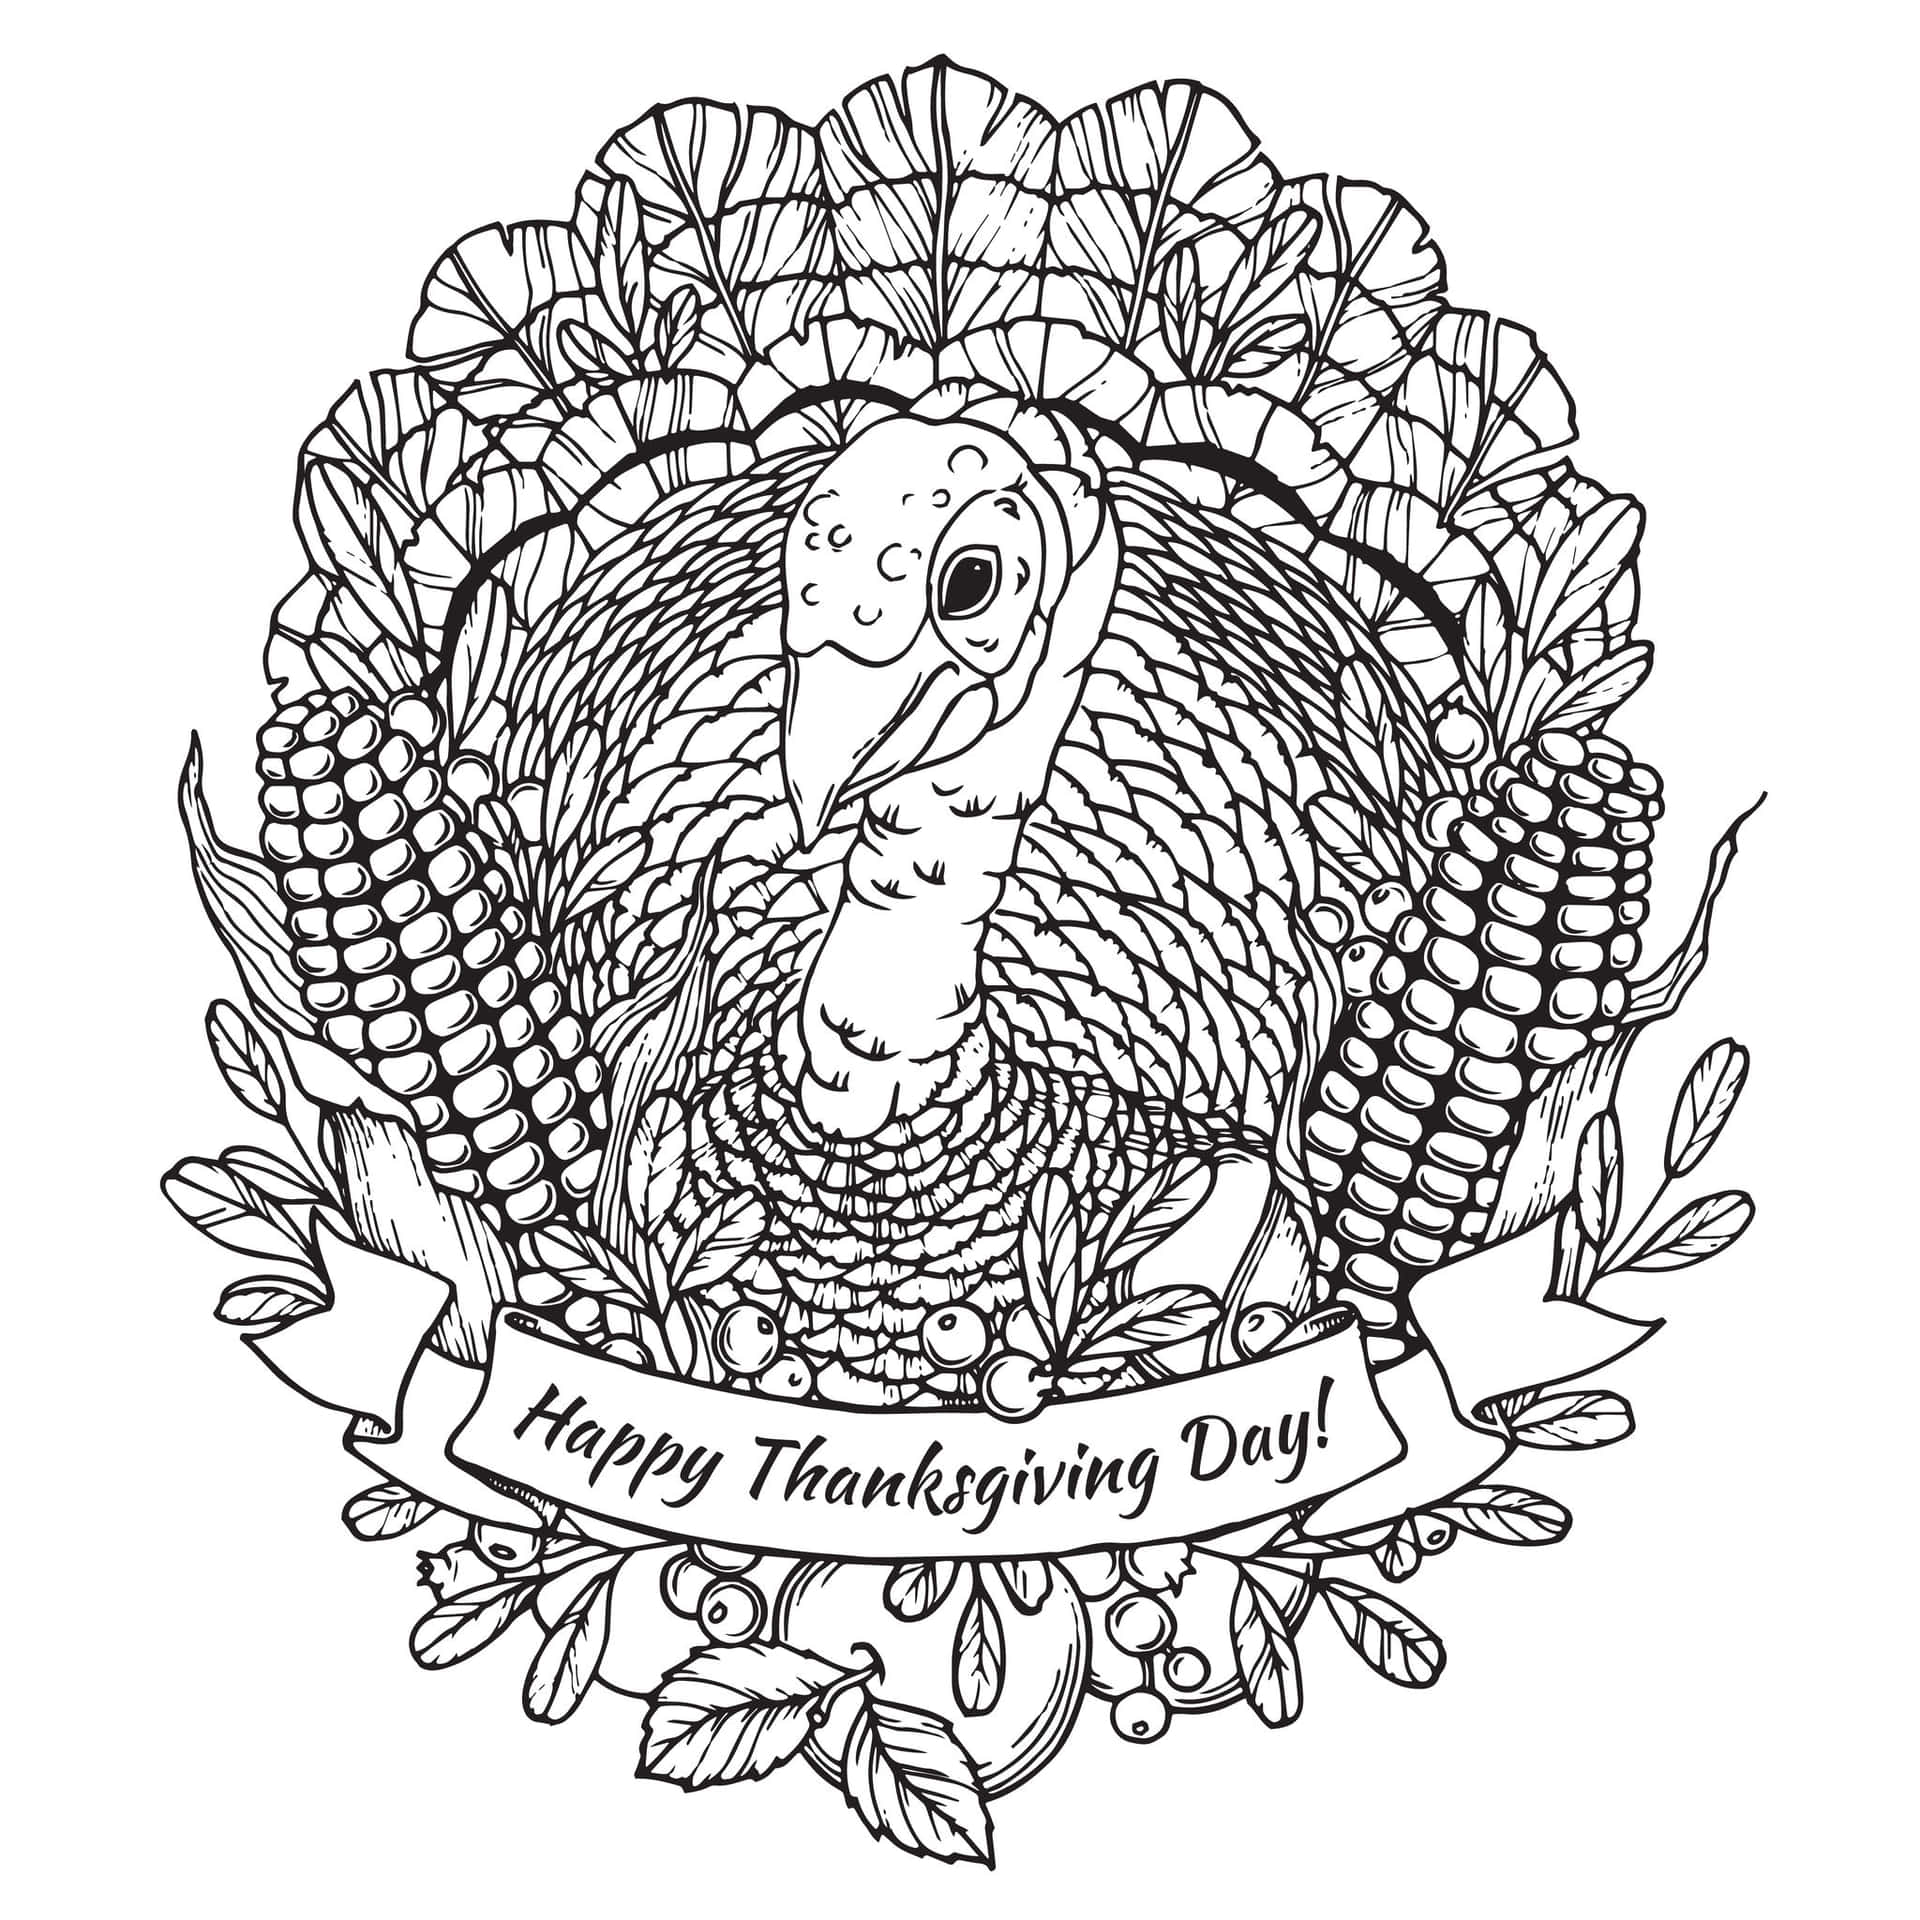 Get into the Thanksgiving spirit with these festive coloring pages.